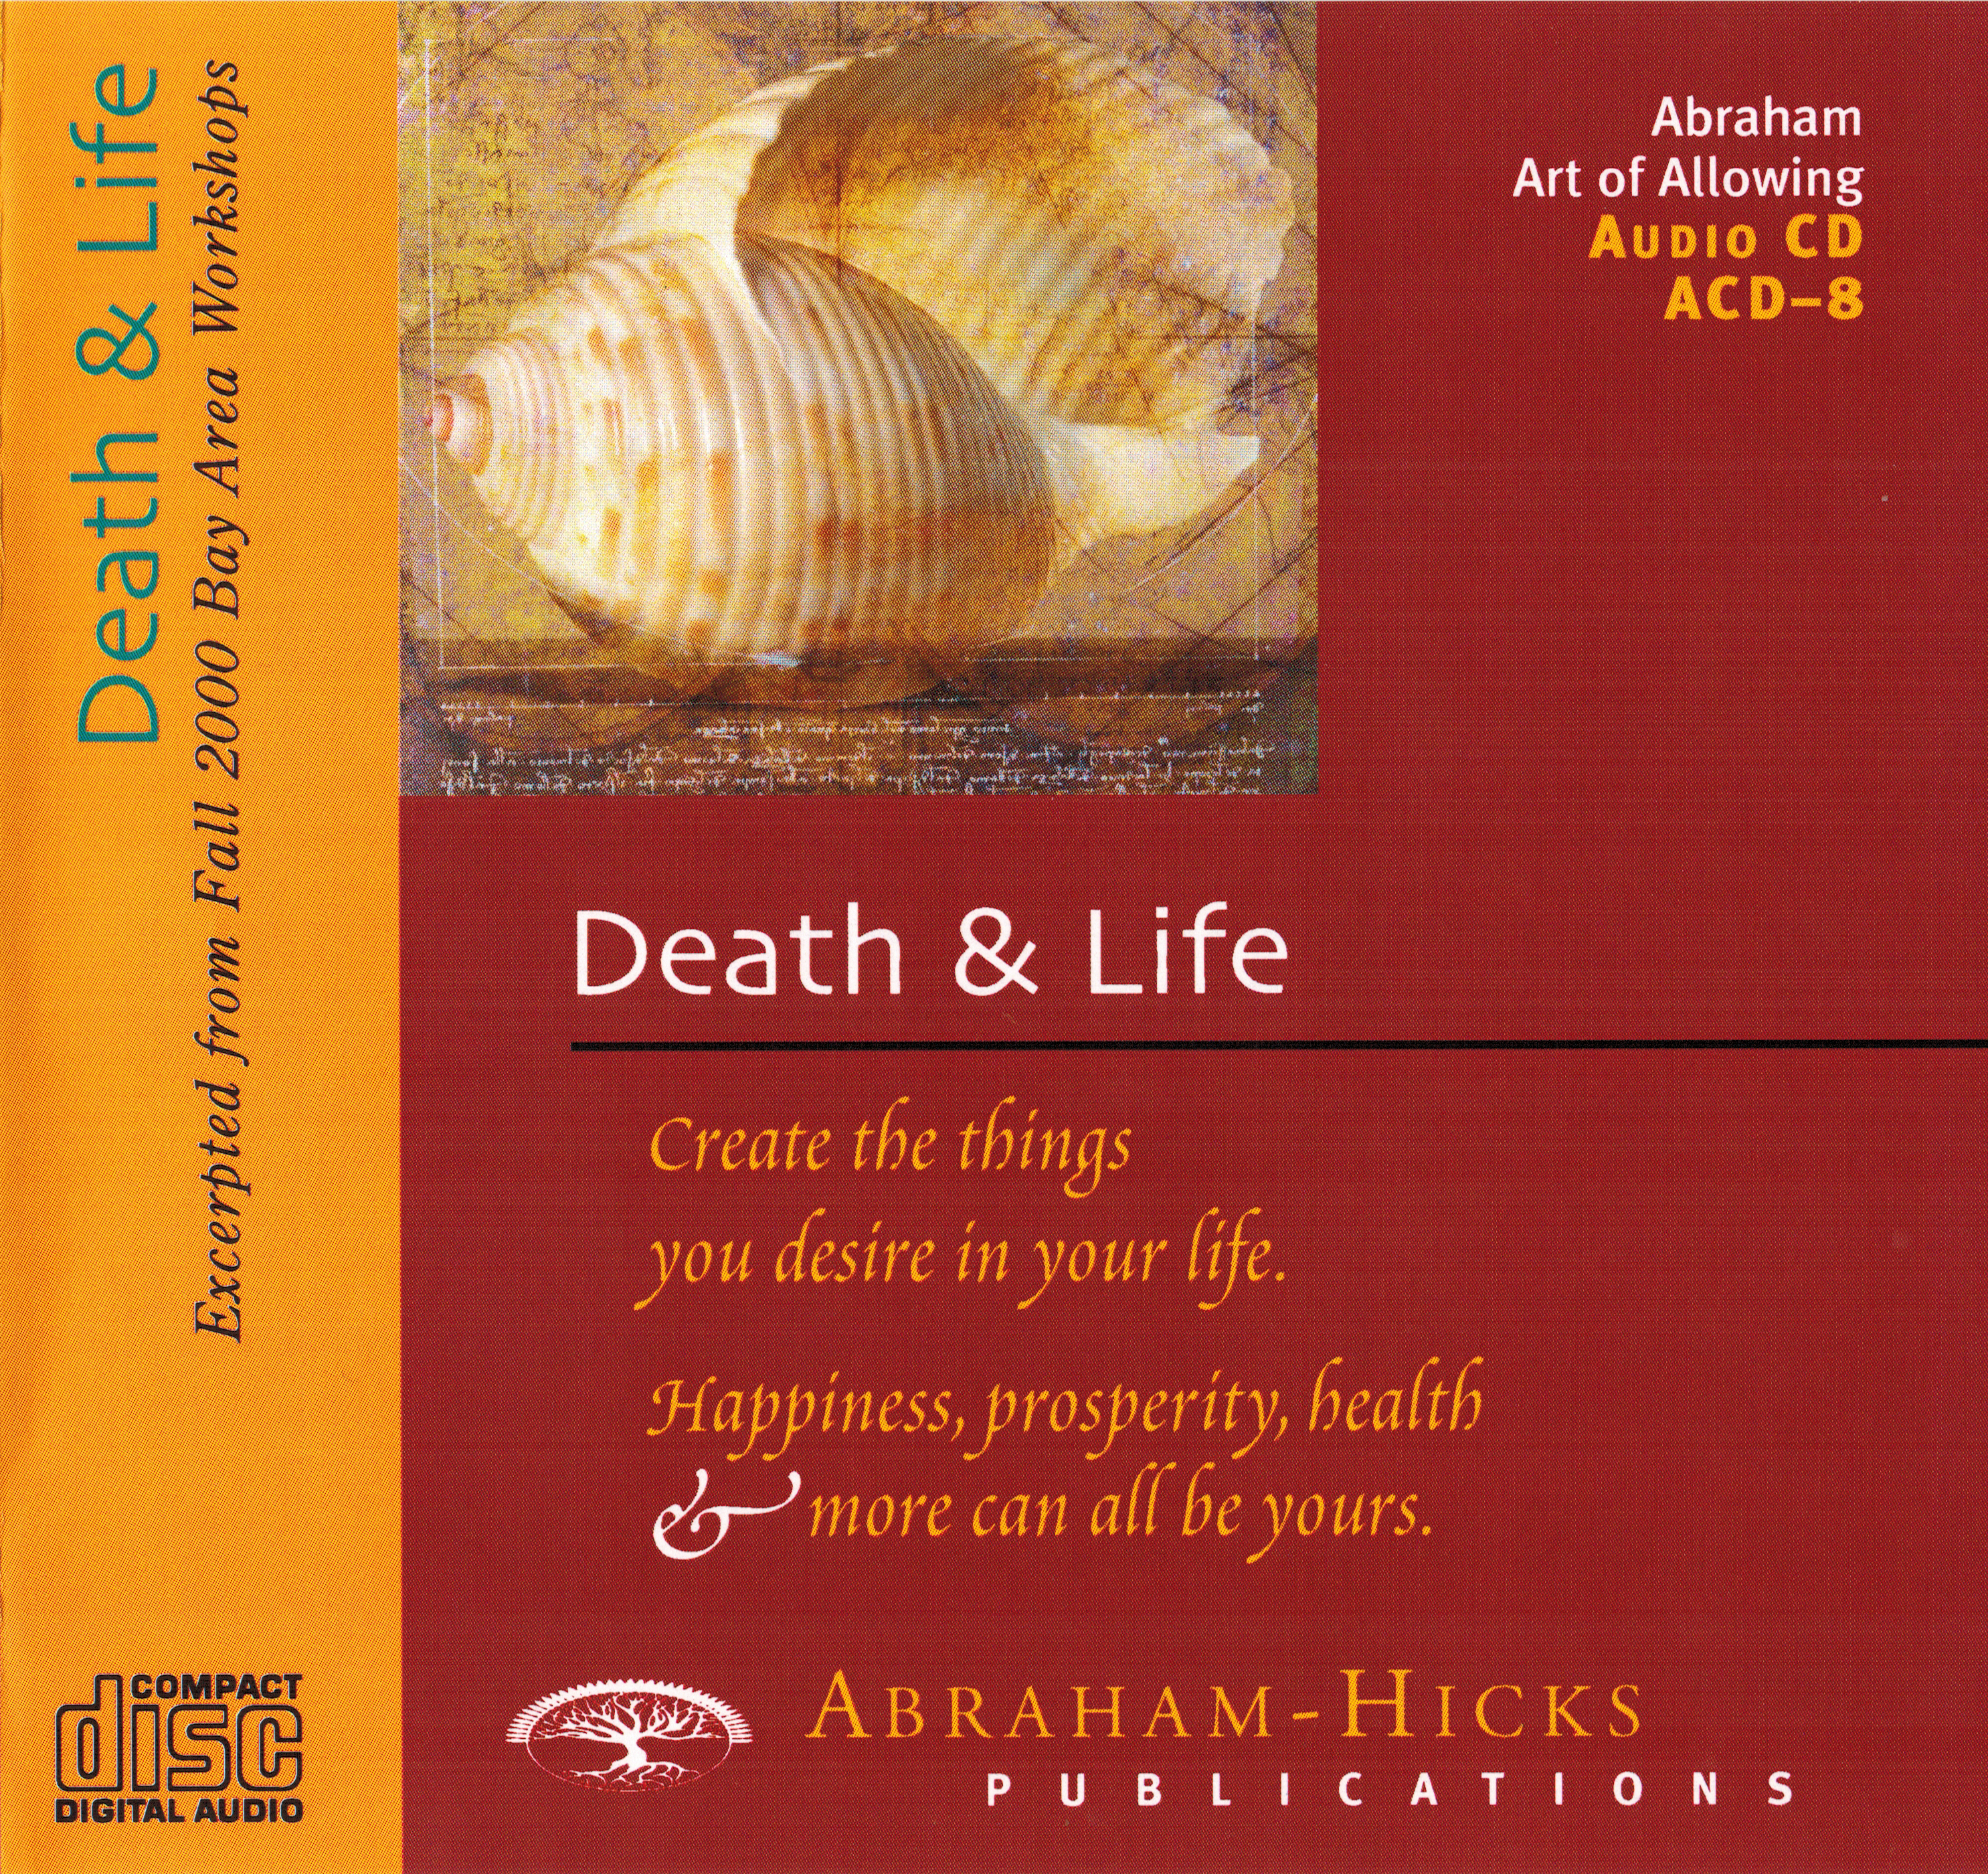 Special Subjects MP3: Death & Life